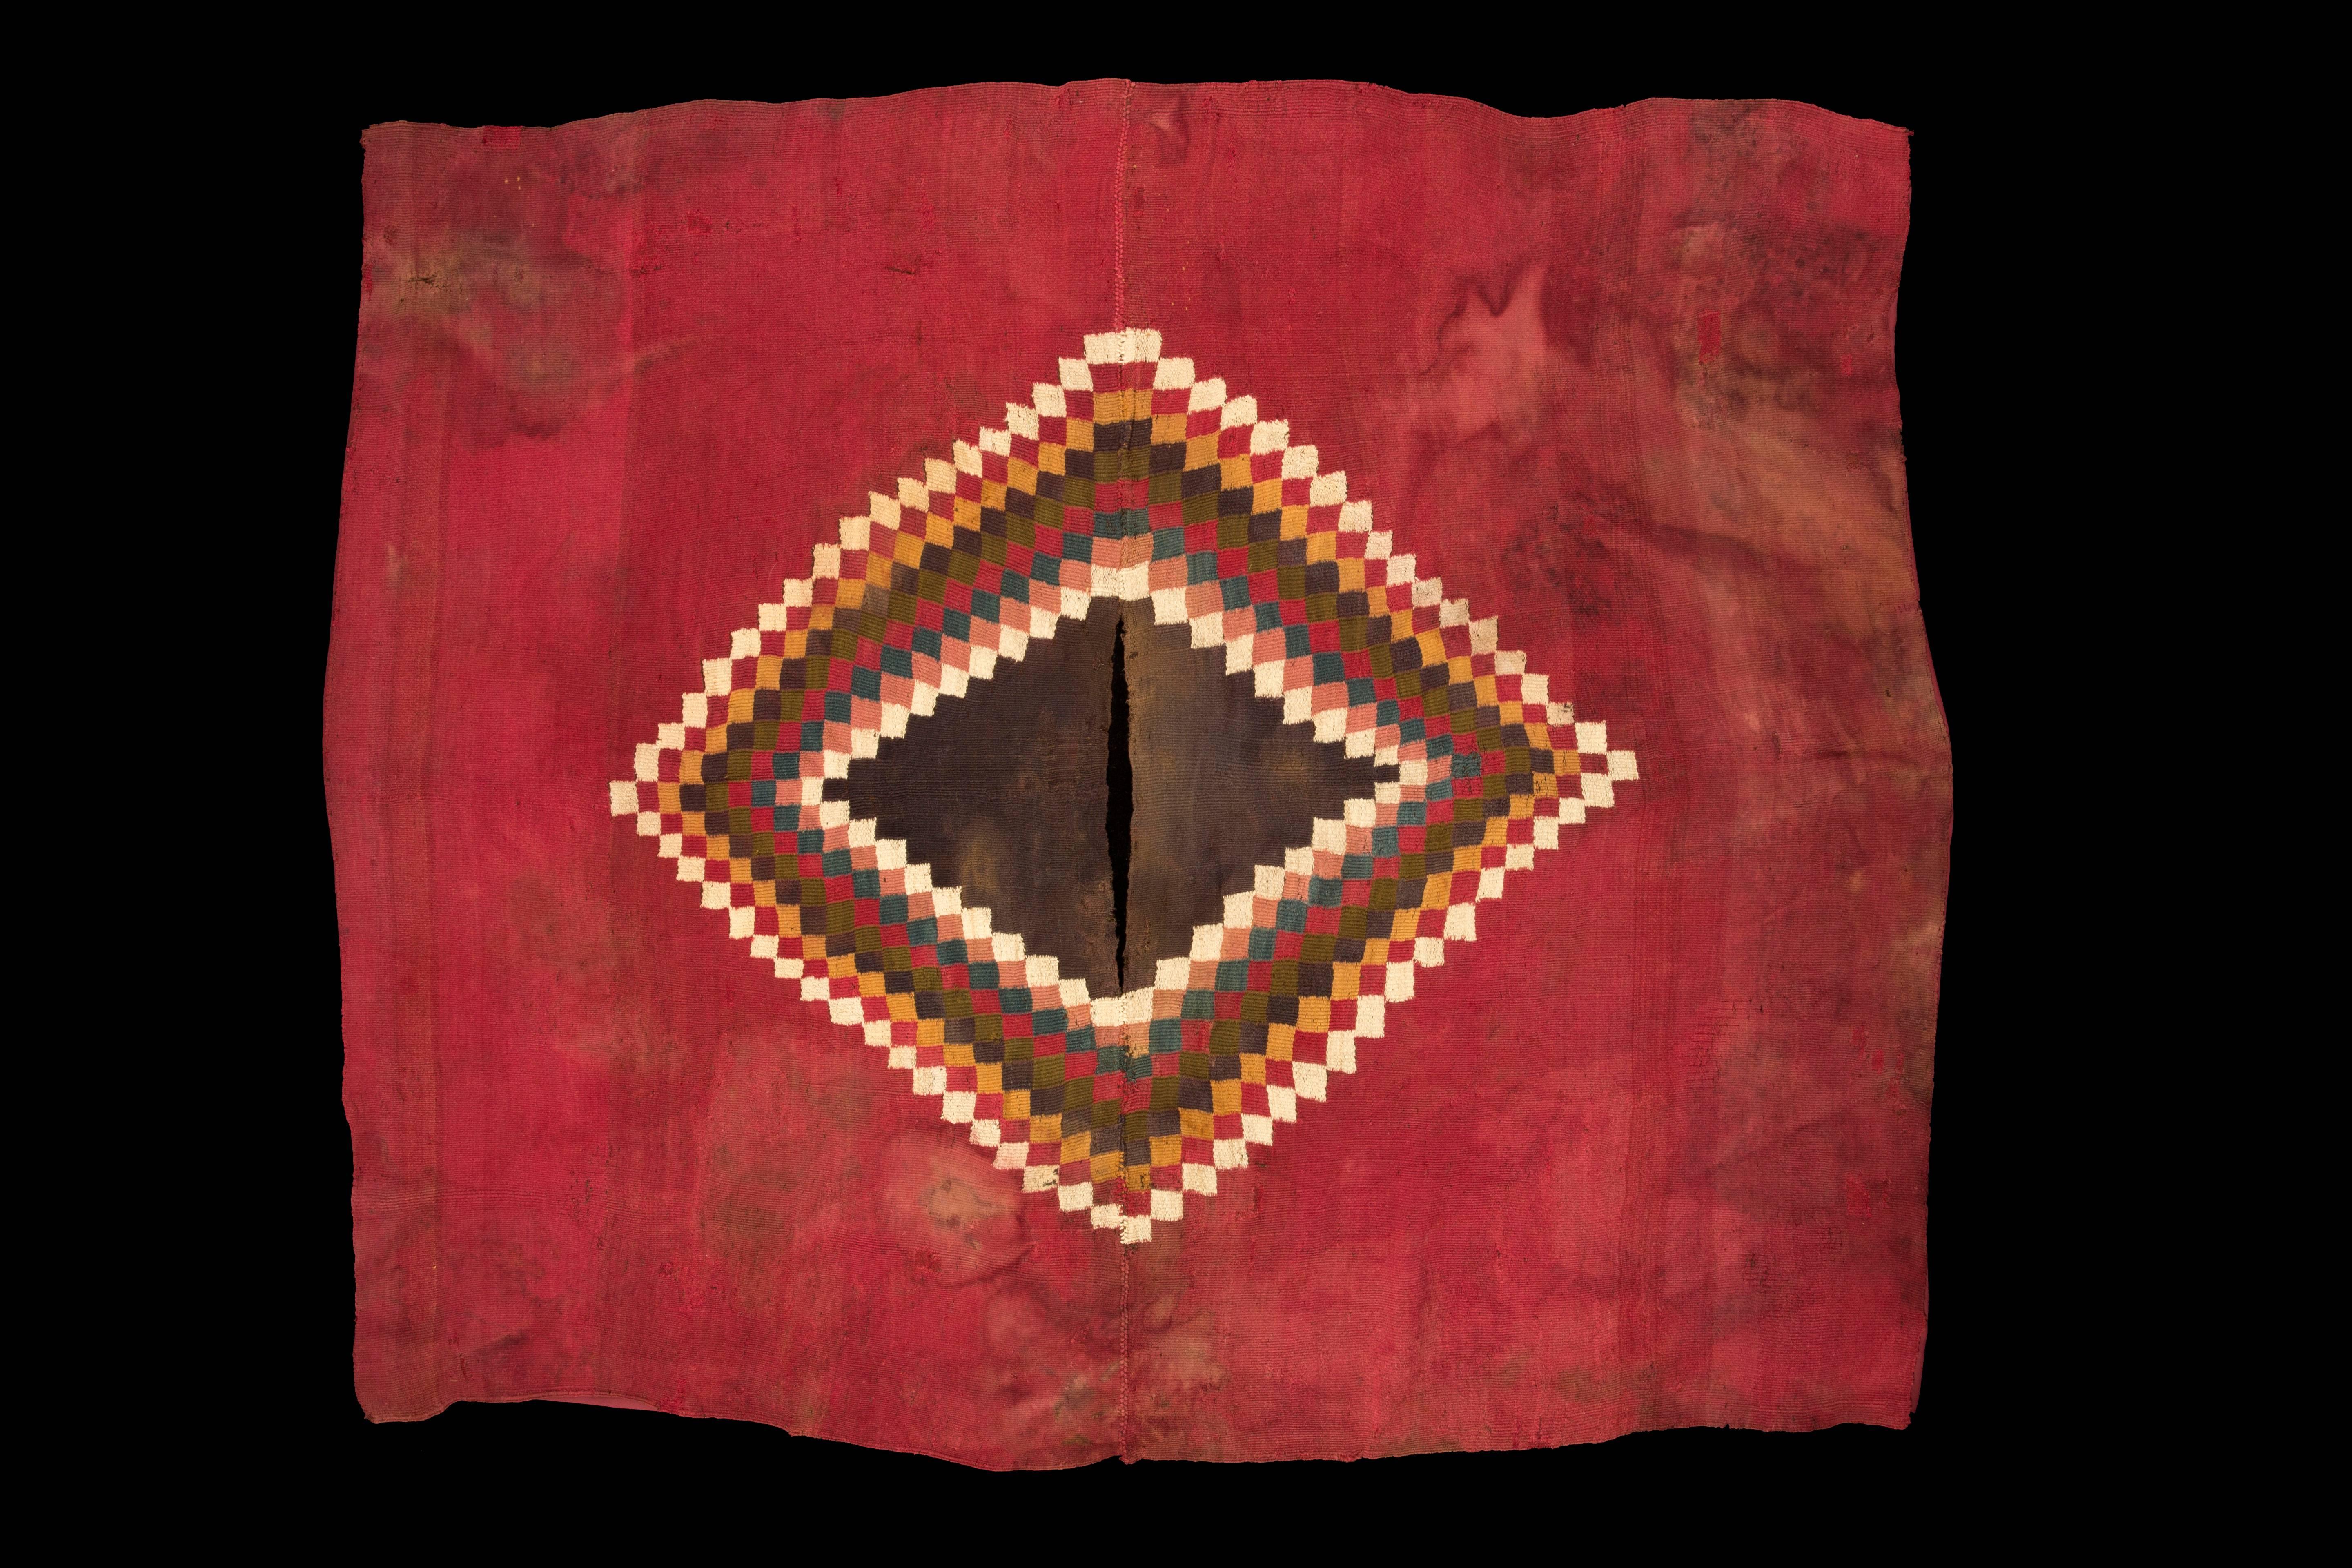 Complete Nazca Unku in vibrant red with blue, green, yellow and white squares forming V design around the brown neck opening. The multicolor squares in stepped design make a diamond shape when the unku is open.

200-300 CE

Nazca, Peru

Size: